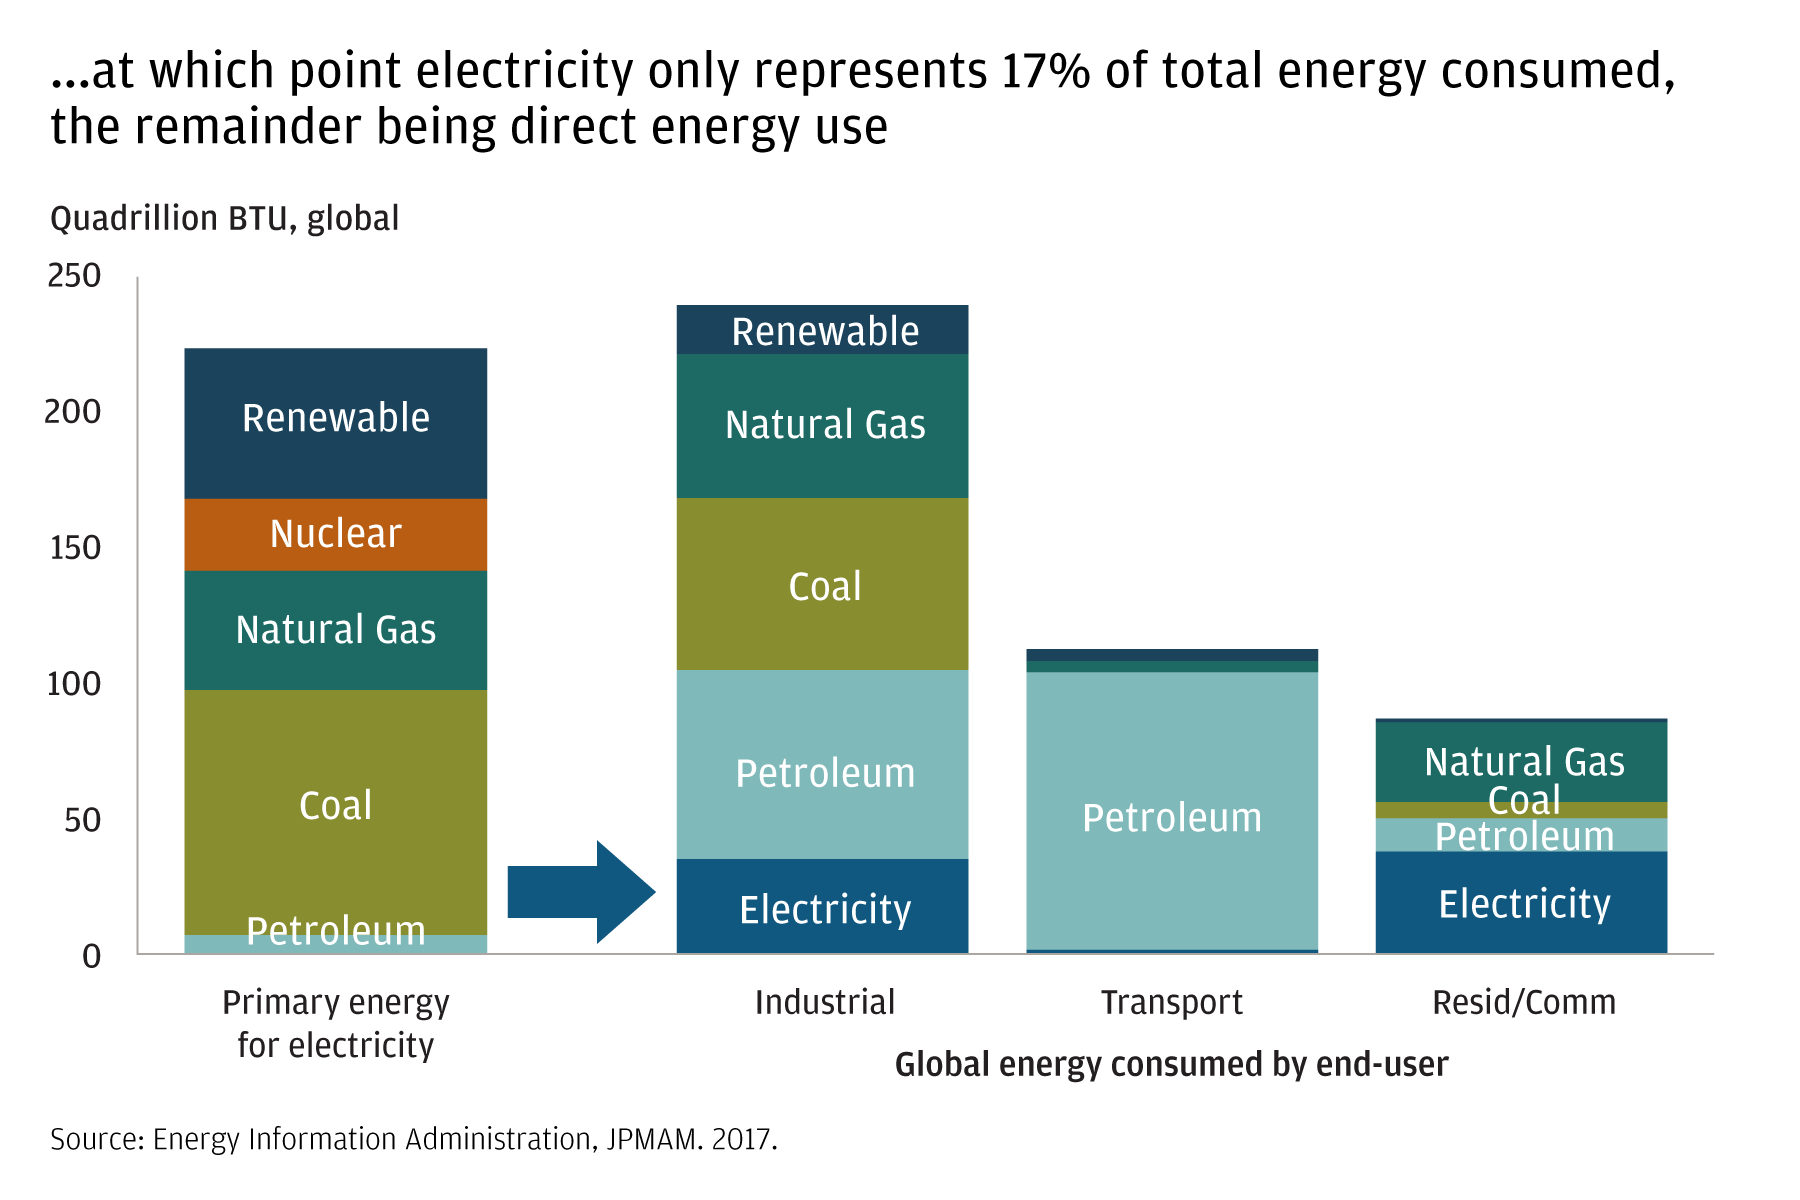 These charts show the sources of energy used by the industrial, transport and residential/consumer sectors. While industry uses natural gas, coal and petroleum in almost equal quantities, with electricity and renewables in lesser roles, the transport sector is almost completely dependent on petroleum at present. In the consumer/retail sector, the smallest of the three, electricity and natural gas are the primary energy sources, with coal and petroleum less important and renewables not yet a significant factor. 